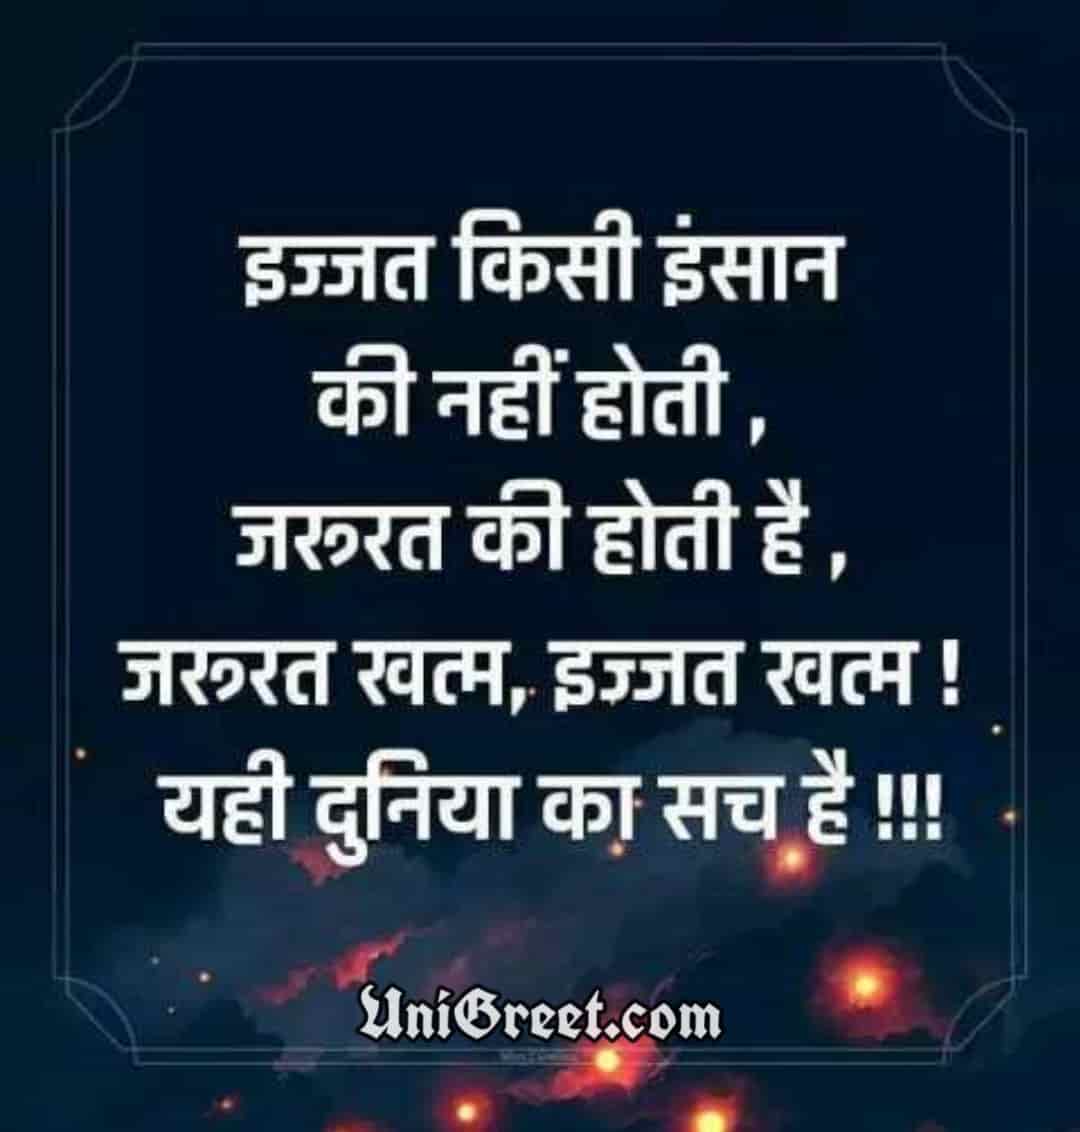 50 Best Hindi Whatsapp Status Images Quotes Wallpaper Pics Download In Hd